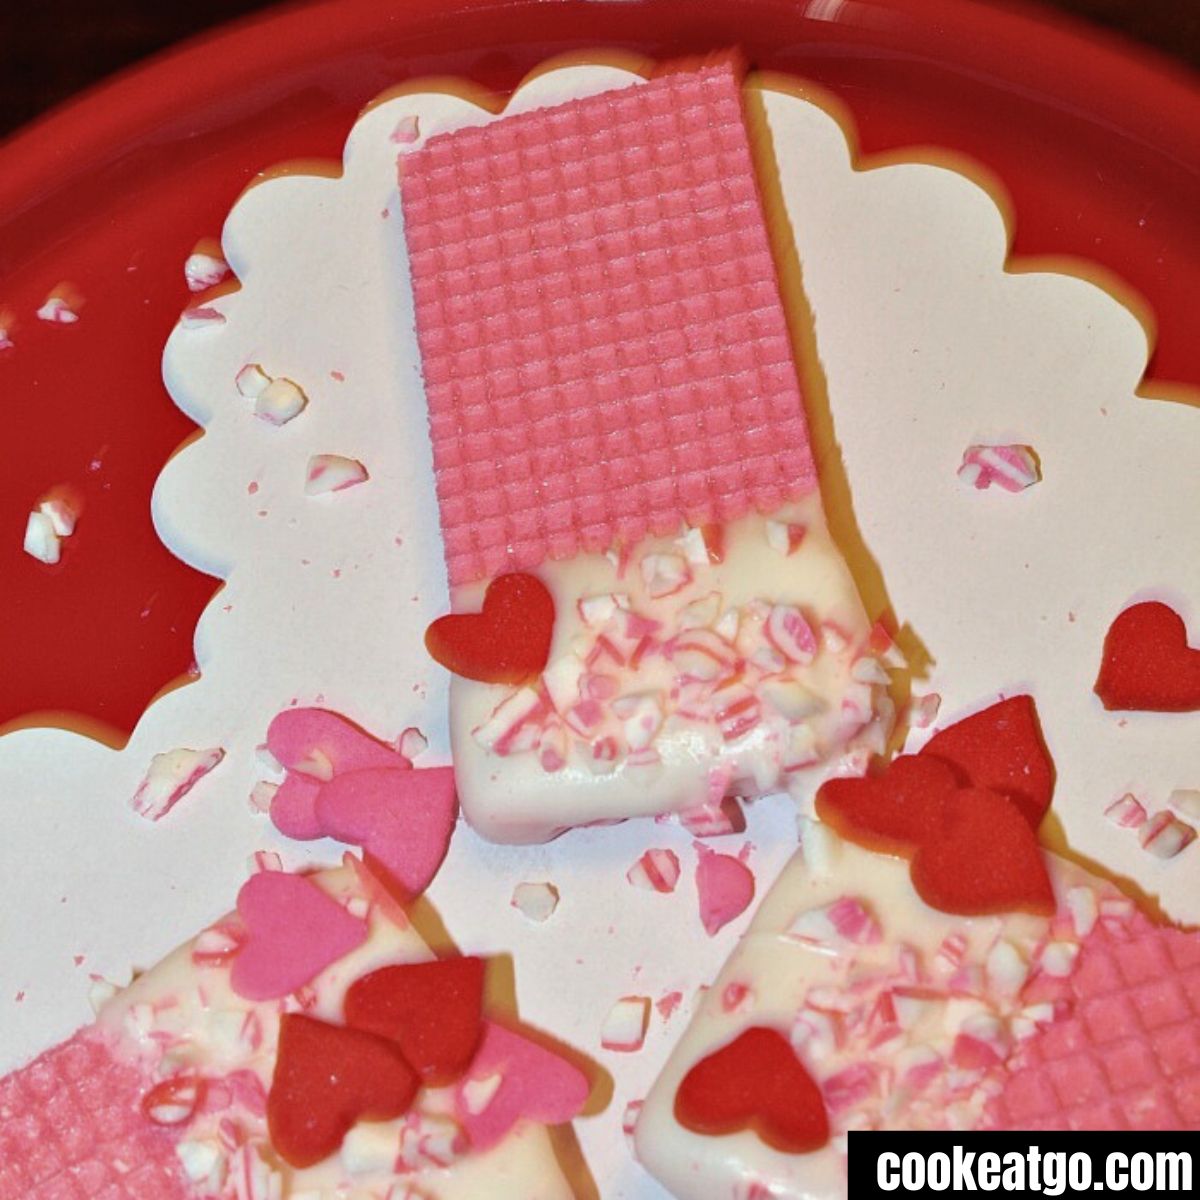 Pink wafer cookies dipped in white chocolate sprinkled with sprinkles on a red plate 